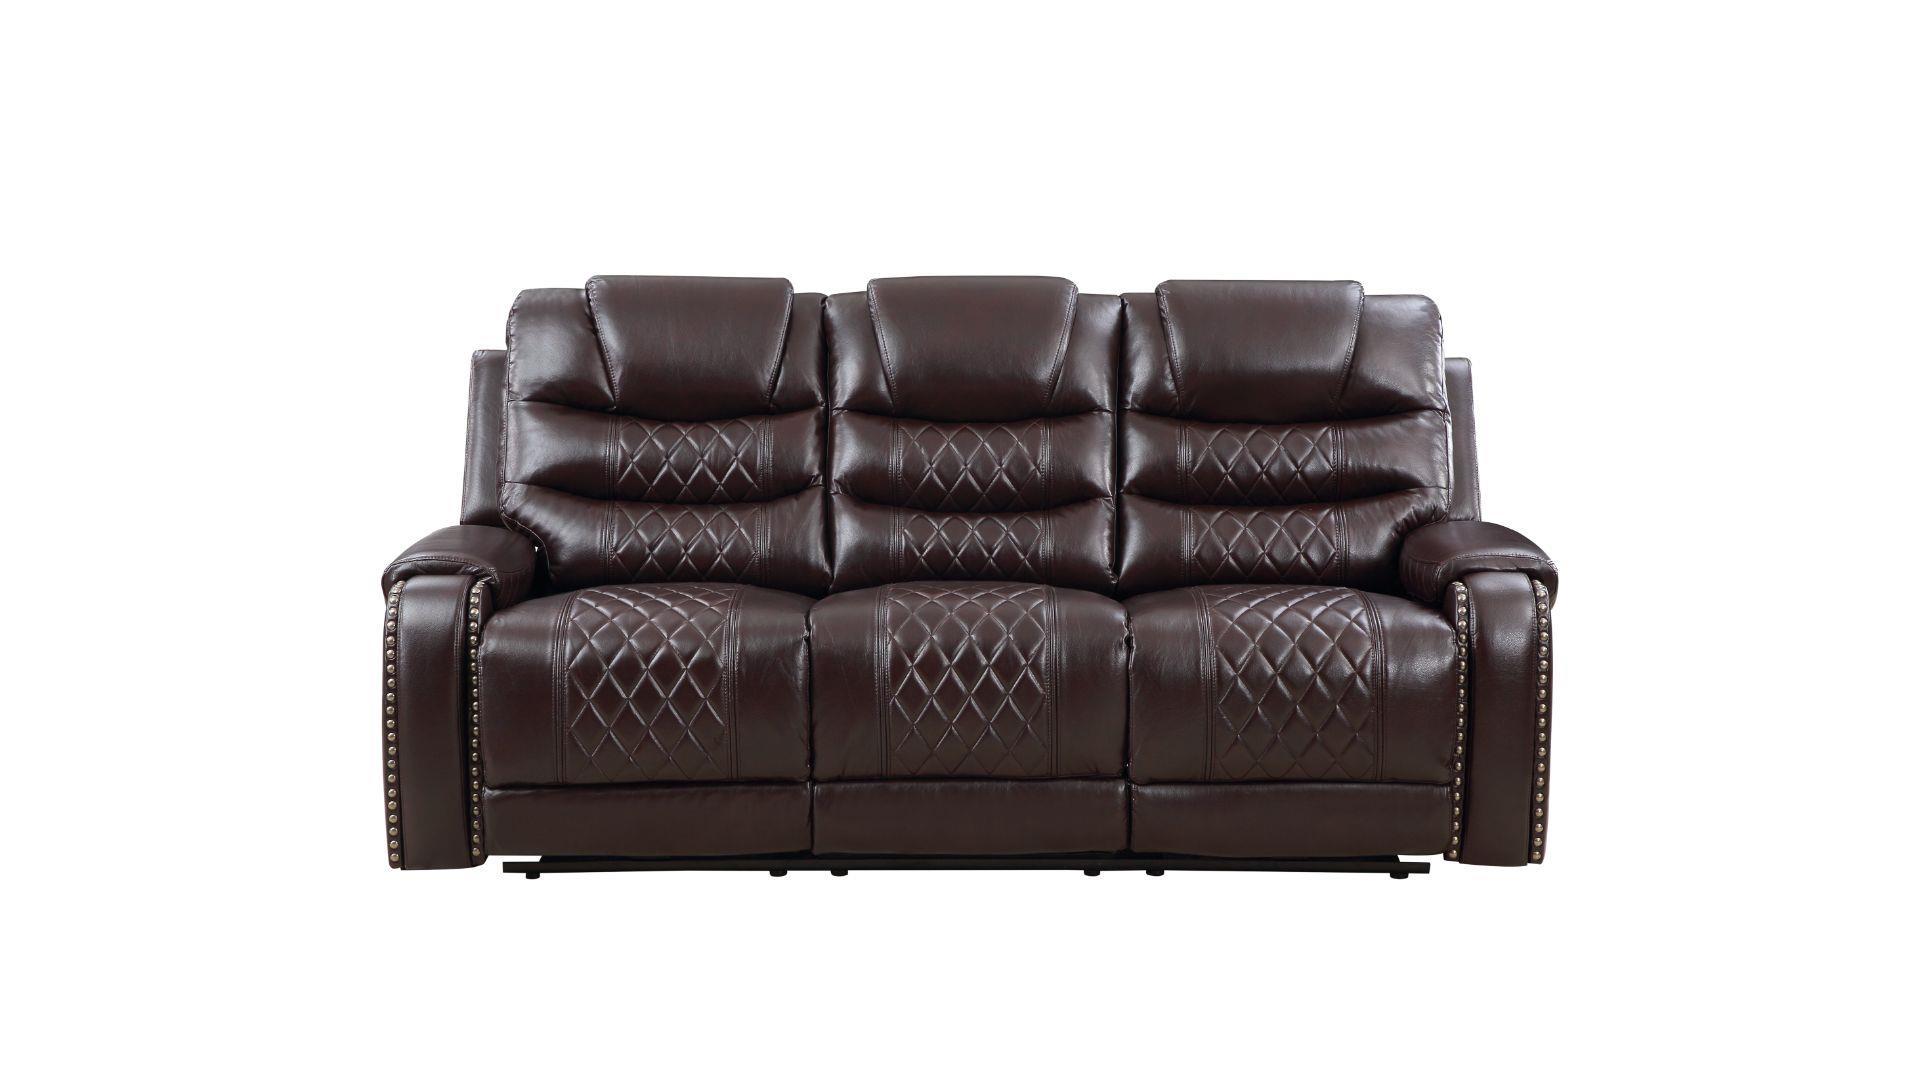 Galaxy Home Furniture TENNESSEE-BR Recliner Sofa